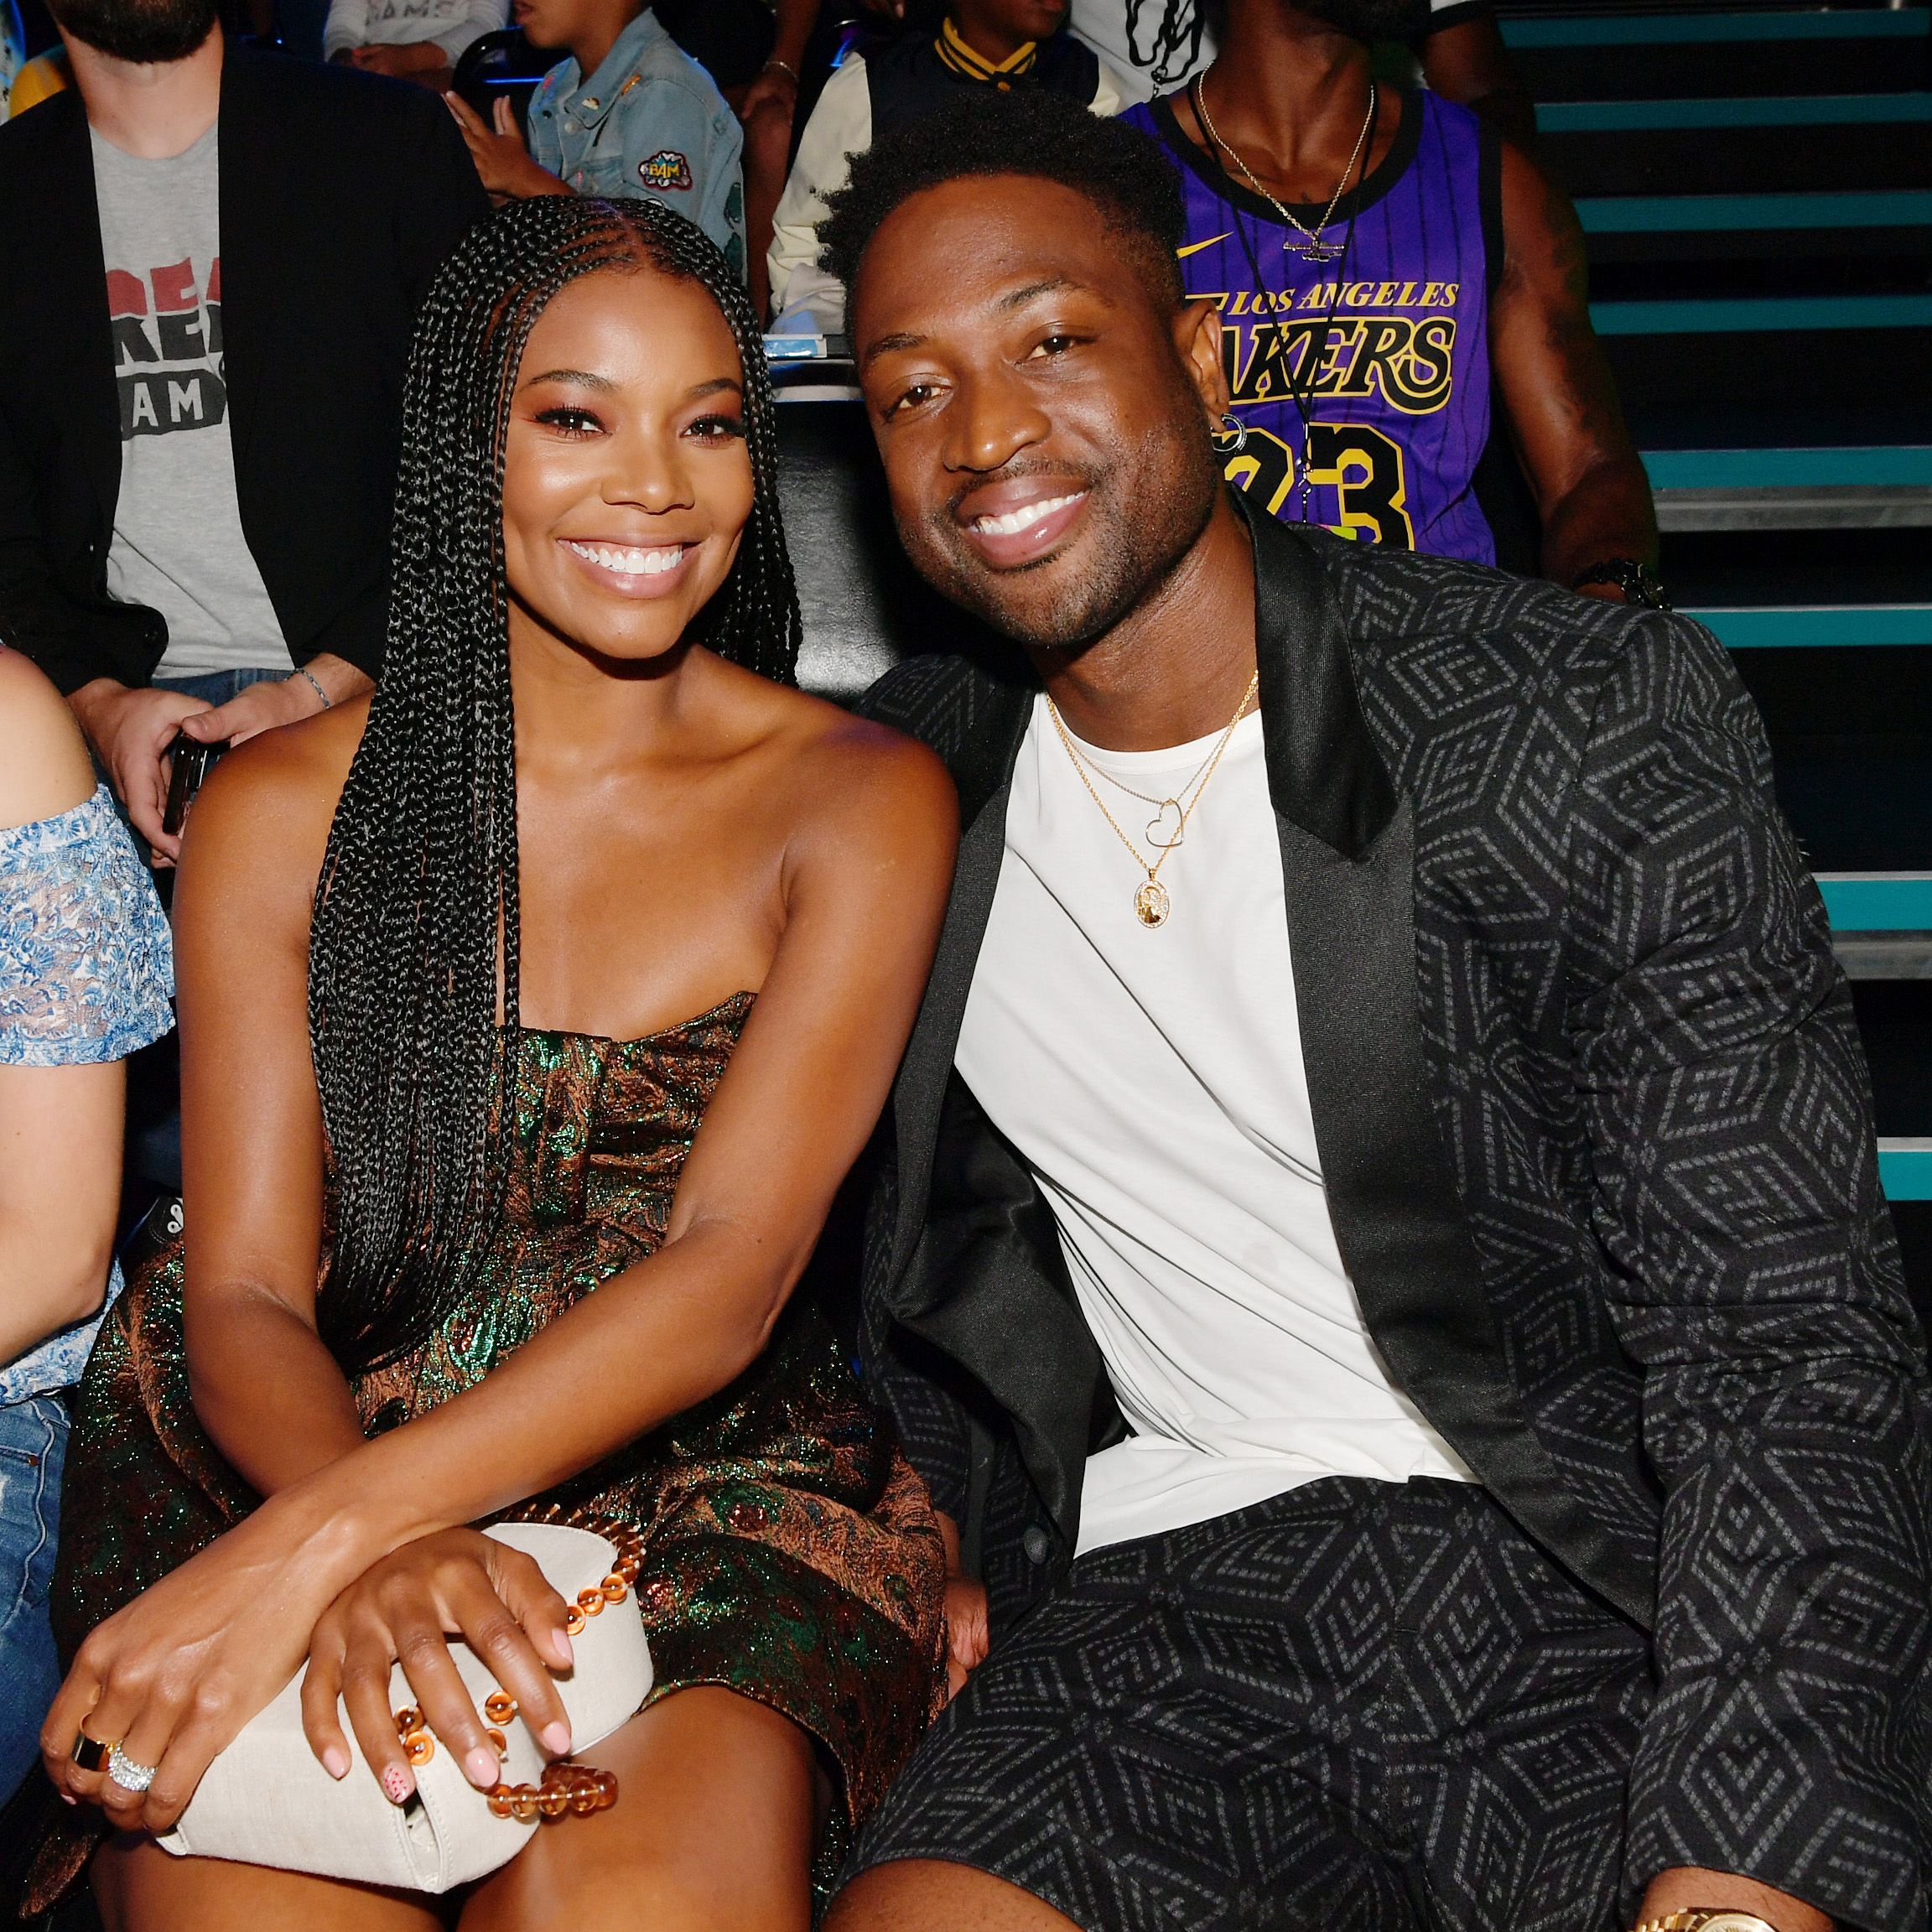 Gabrielle Union and Dwyane Wade attending a Nickelodeon event on July 11, 2019 | Photo: Getty Images